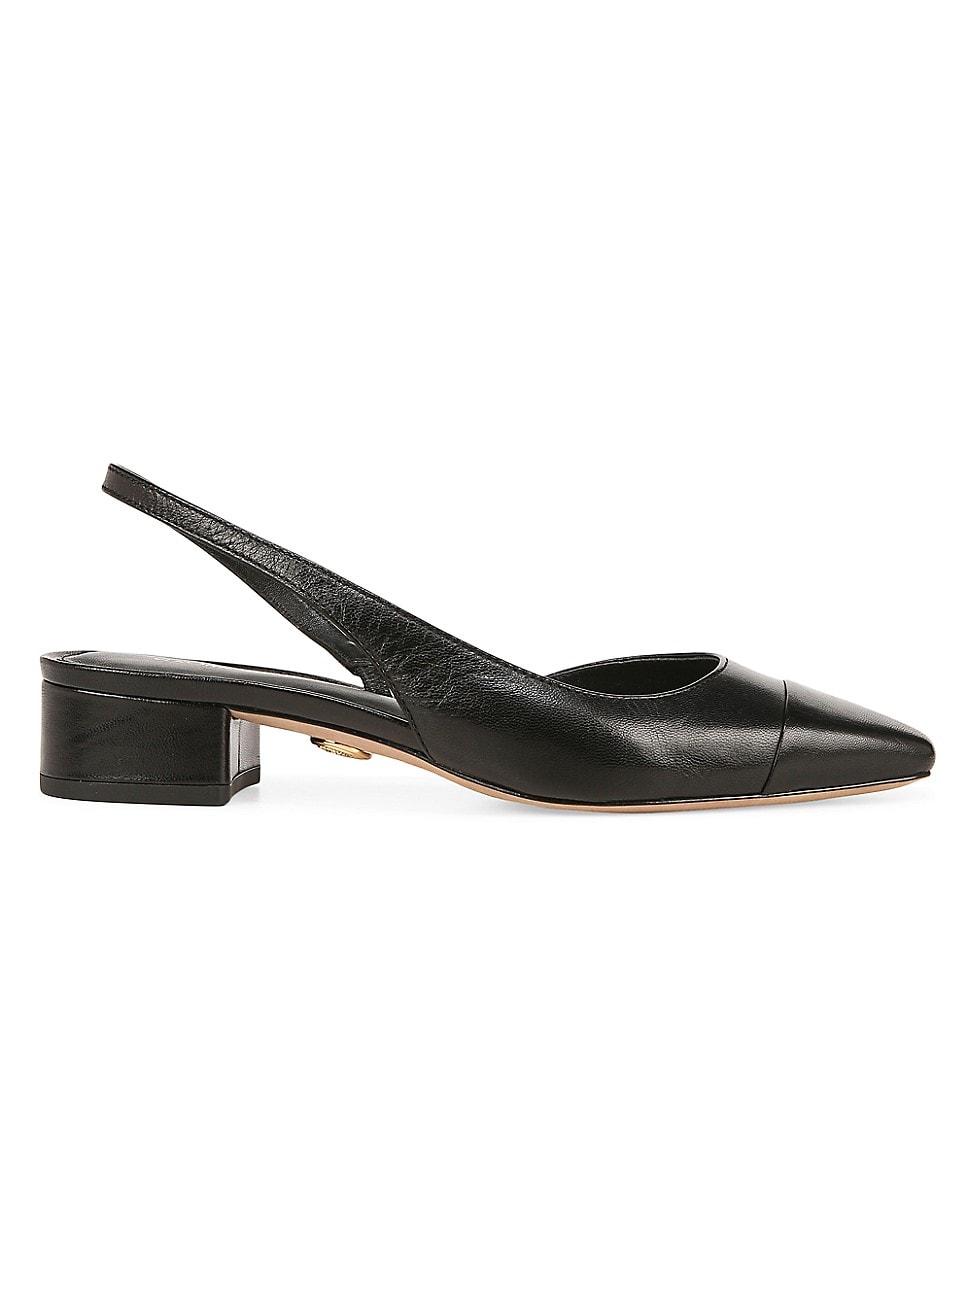 Veronica Beard Cecile Leather Slingback Pumps in Black | Lyst